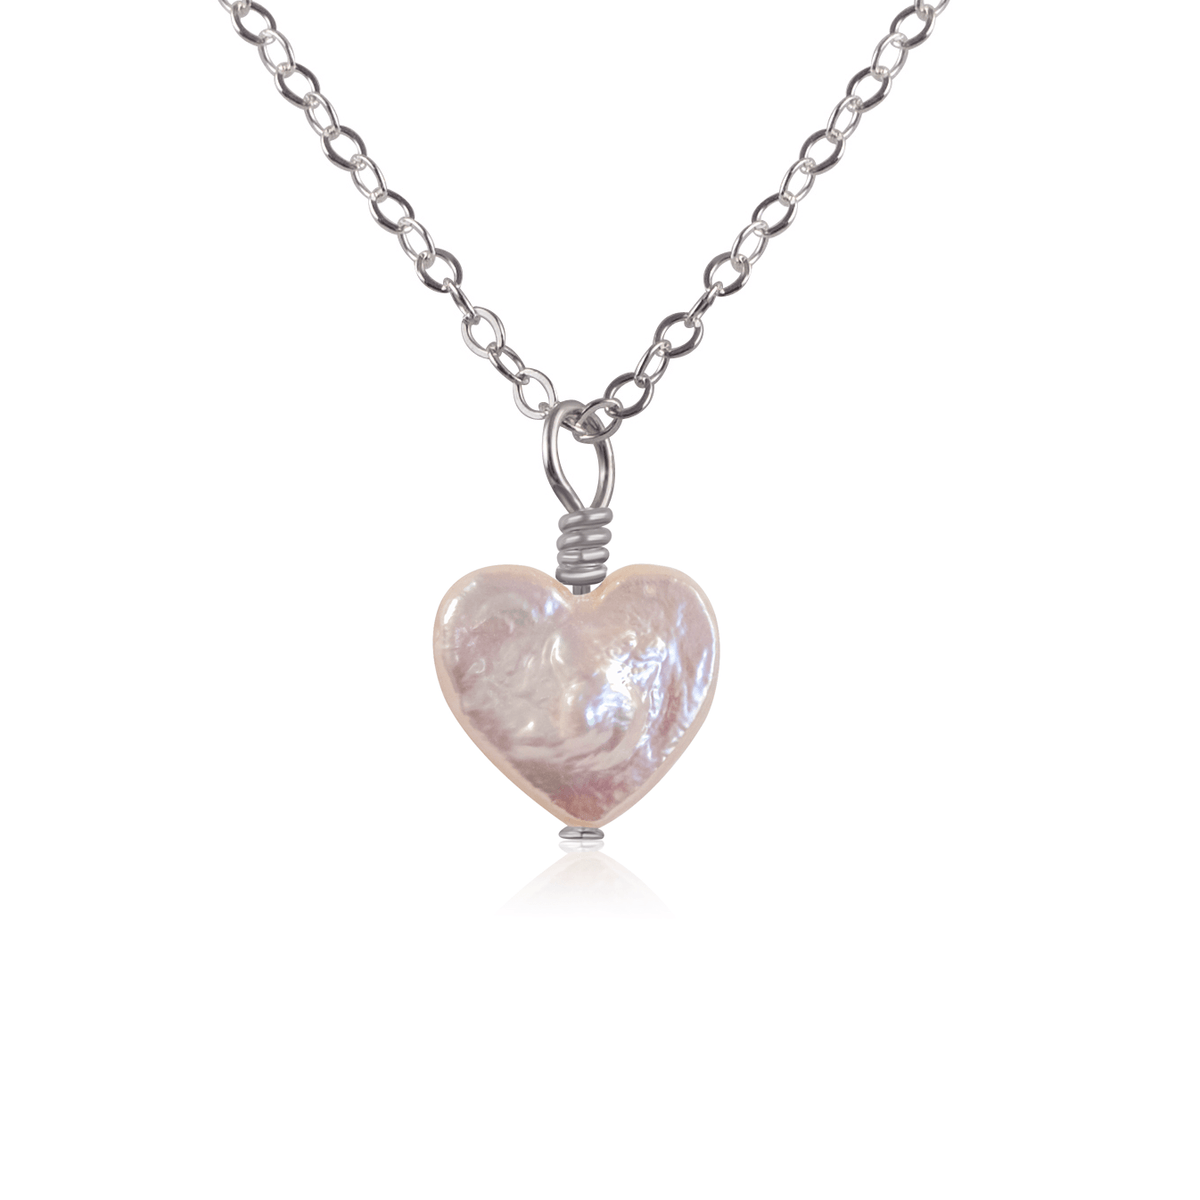 Freshwater Pearl Heart Pendant Necklace - Freshwater Pearl Heart Pendant Necklace - Stainless Steel / Cable - Luna Tide Handmade Crystal Jewellery